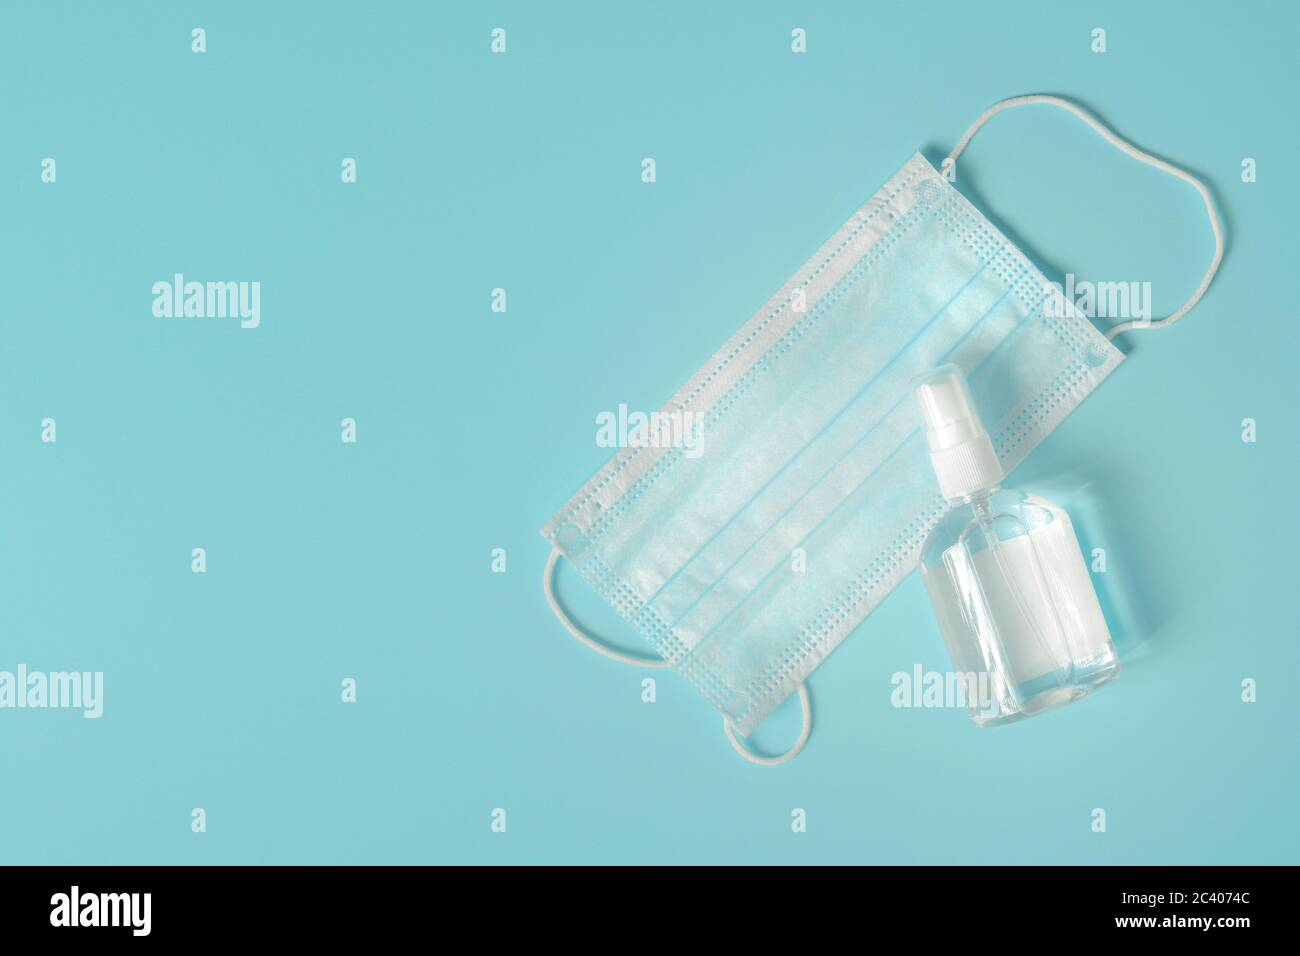 Disinfection gel and protective surgical mask on blue background with copy space, top view flat lay Stock Photo